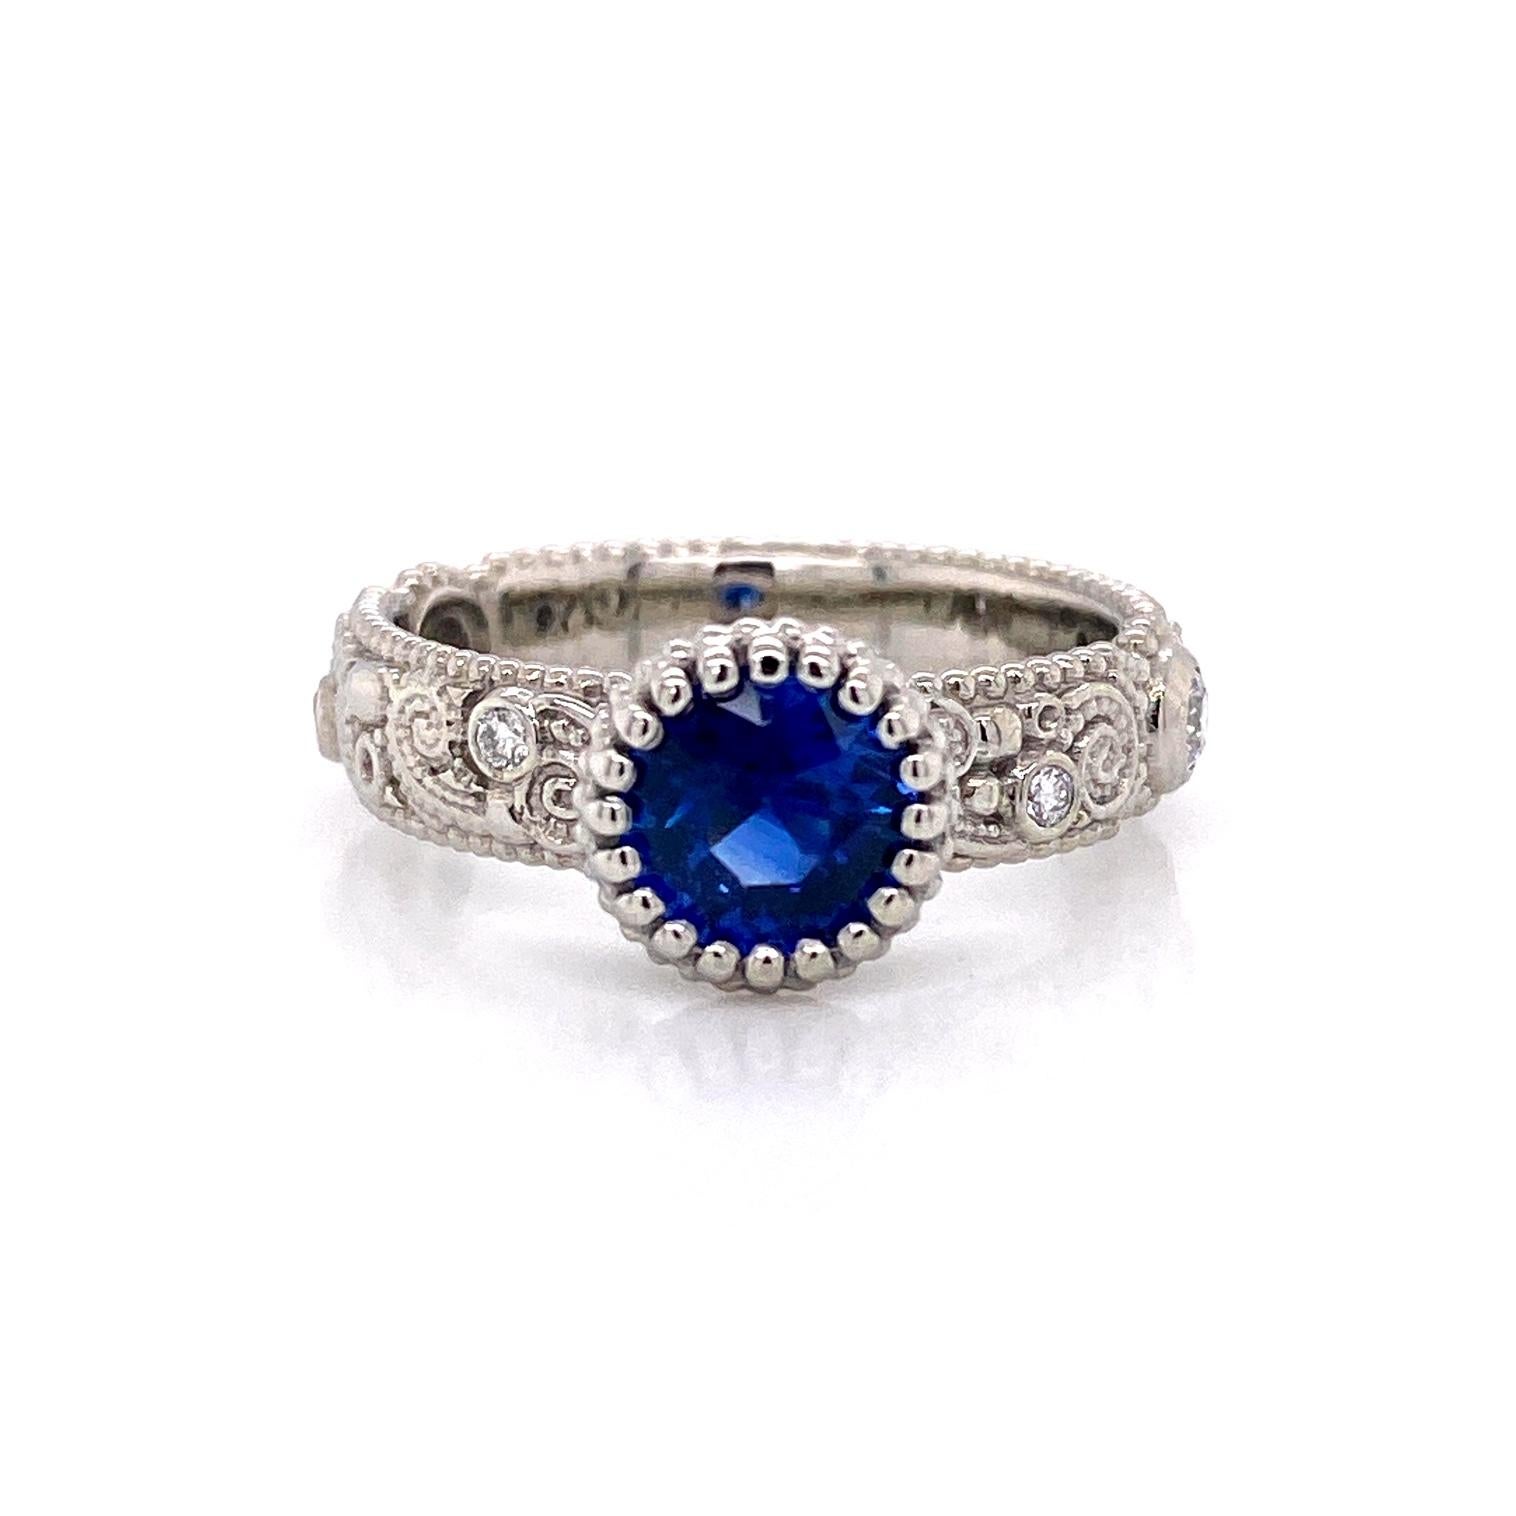 An 18k white gold llyn pattern ring set with one 1.09 carat round blue sapphire and F color VS clarity white diamonds,  (2) 2.5mm for .12 carat weight, and (6) 1.5mm for .09 carat weight. Ring size 7. This ring was made and designed by llyn strong.